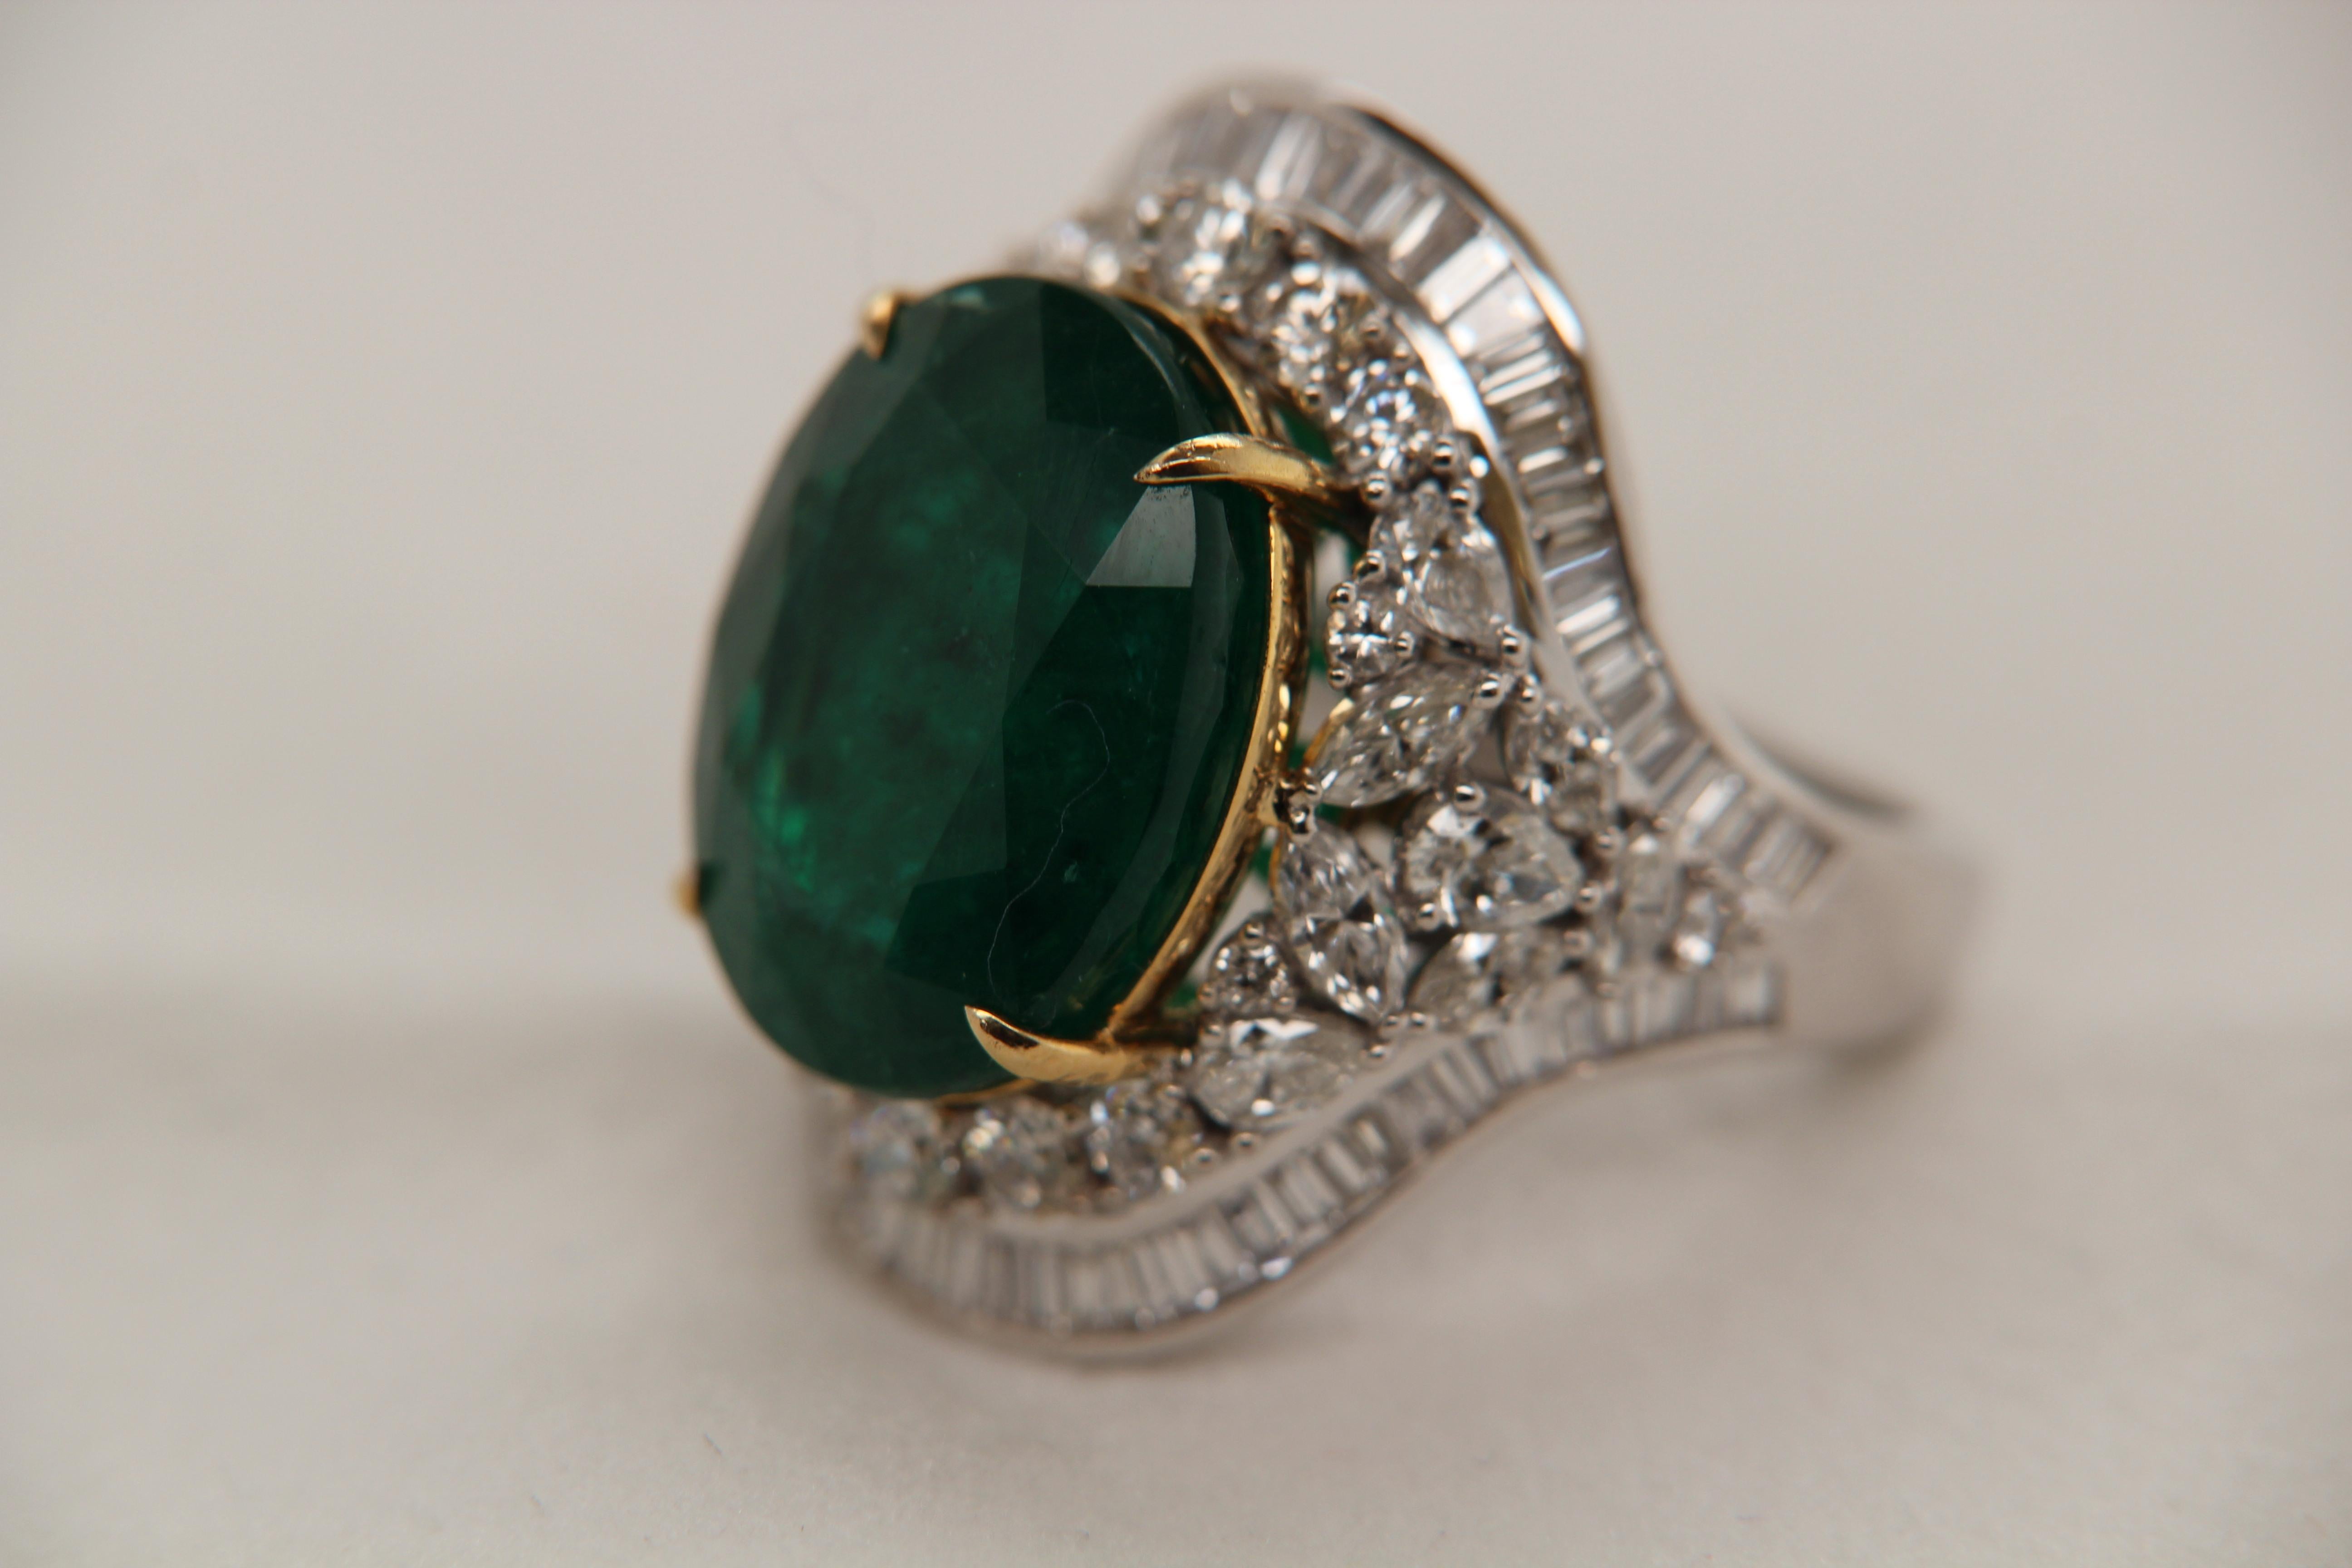 A brand new ICA vivid green 12.91 carat zambian emerald and diamond ring in 18 karat gold. The centre emerald is oval shaped and weighs 12.91 carats. The diamonds weigh 2.93 carats. The gross weight of the whole ring is 13.05 grams.